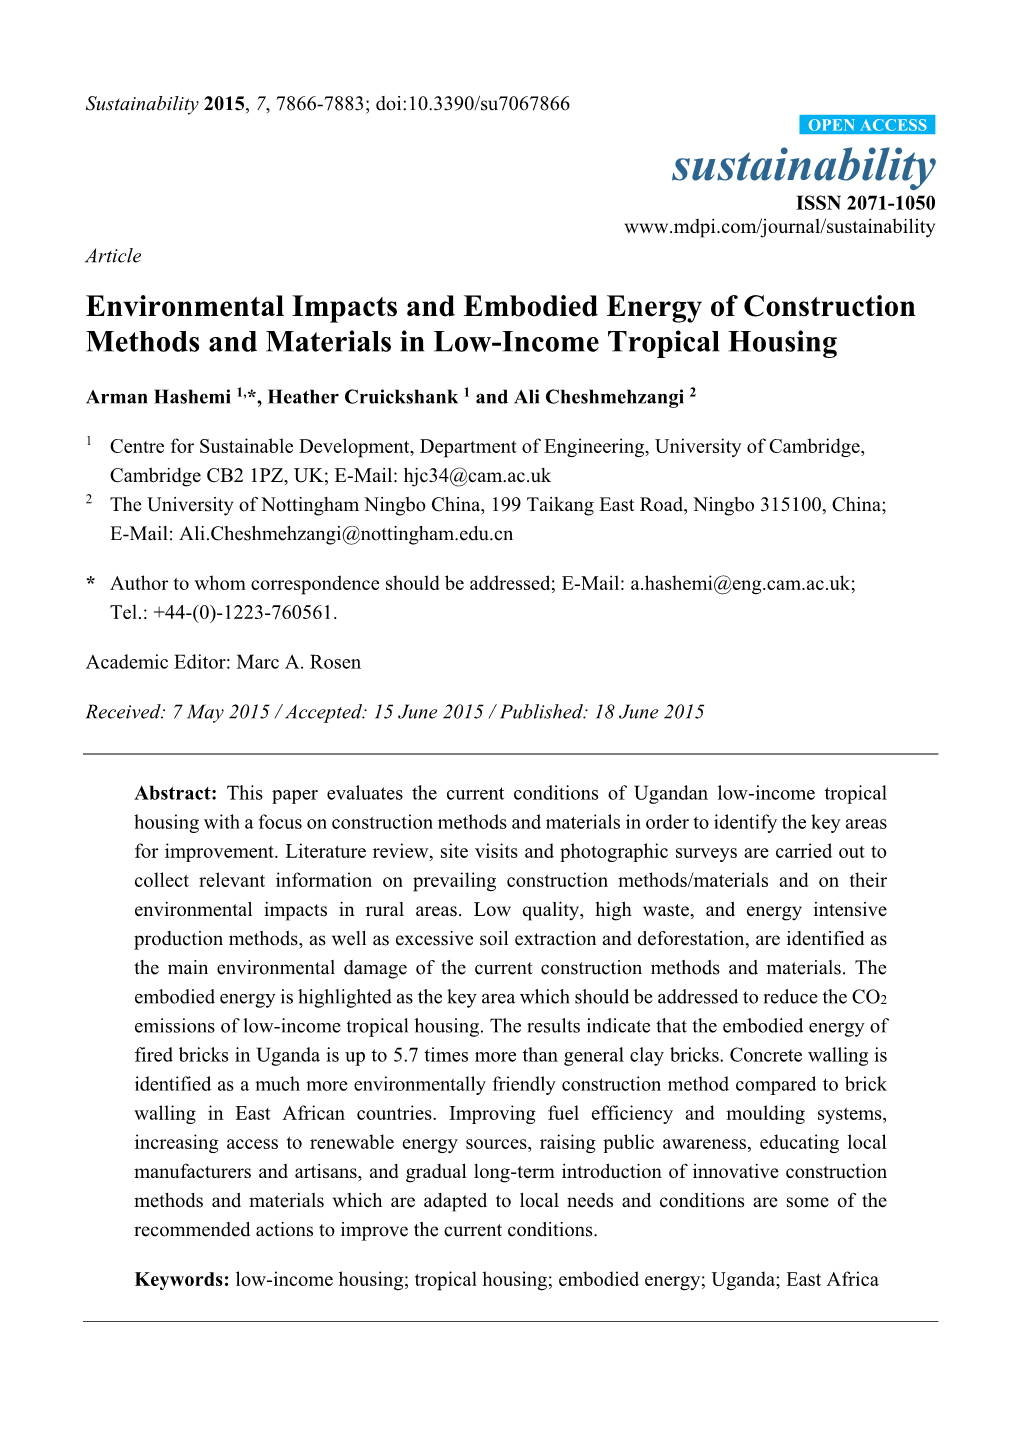 Environmental Impacts and Embodied Energy of Construction Methods and Materials in Low-Income Tropical Housing